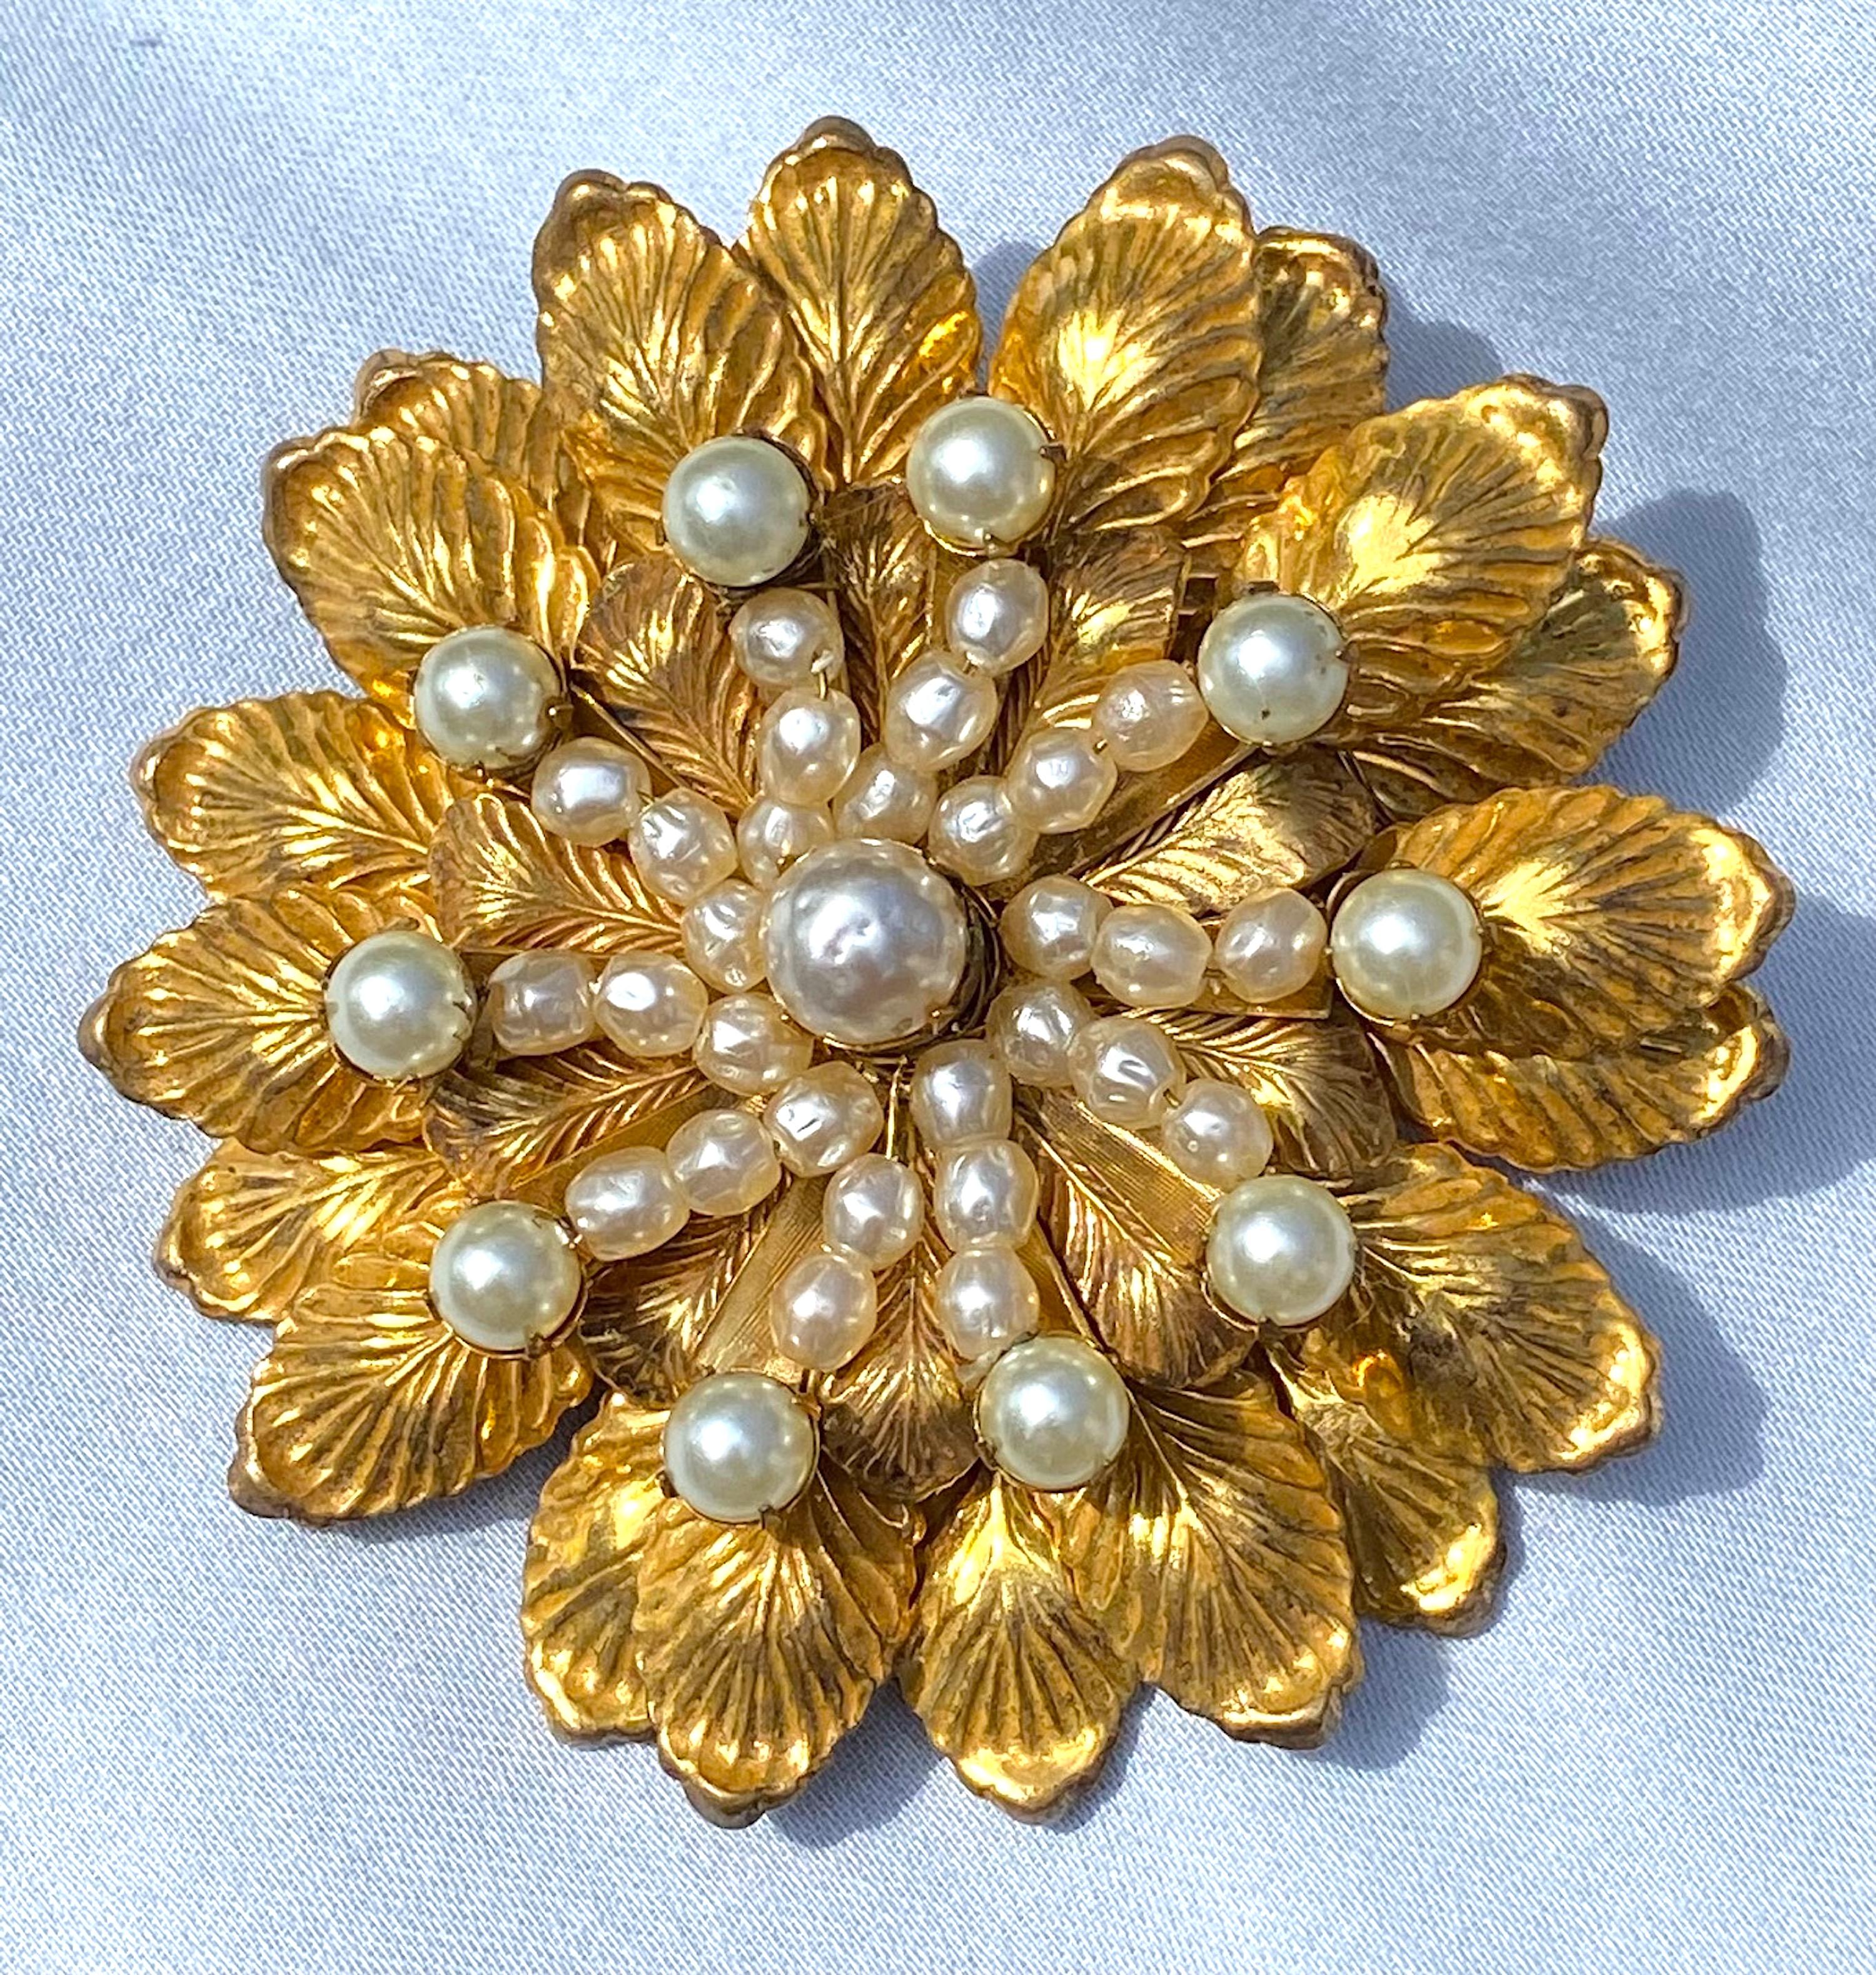 Round Cut Miriam Haskell 1950s Large Gold Flower with Pearls Flower Brooch